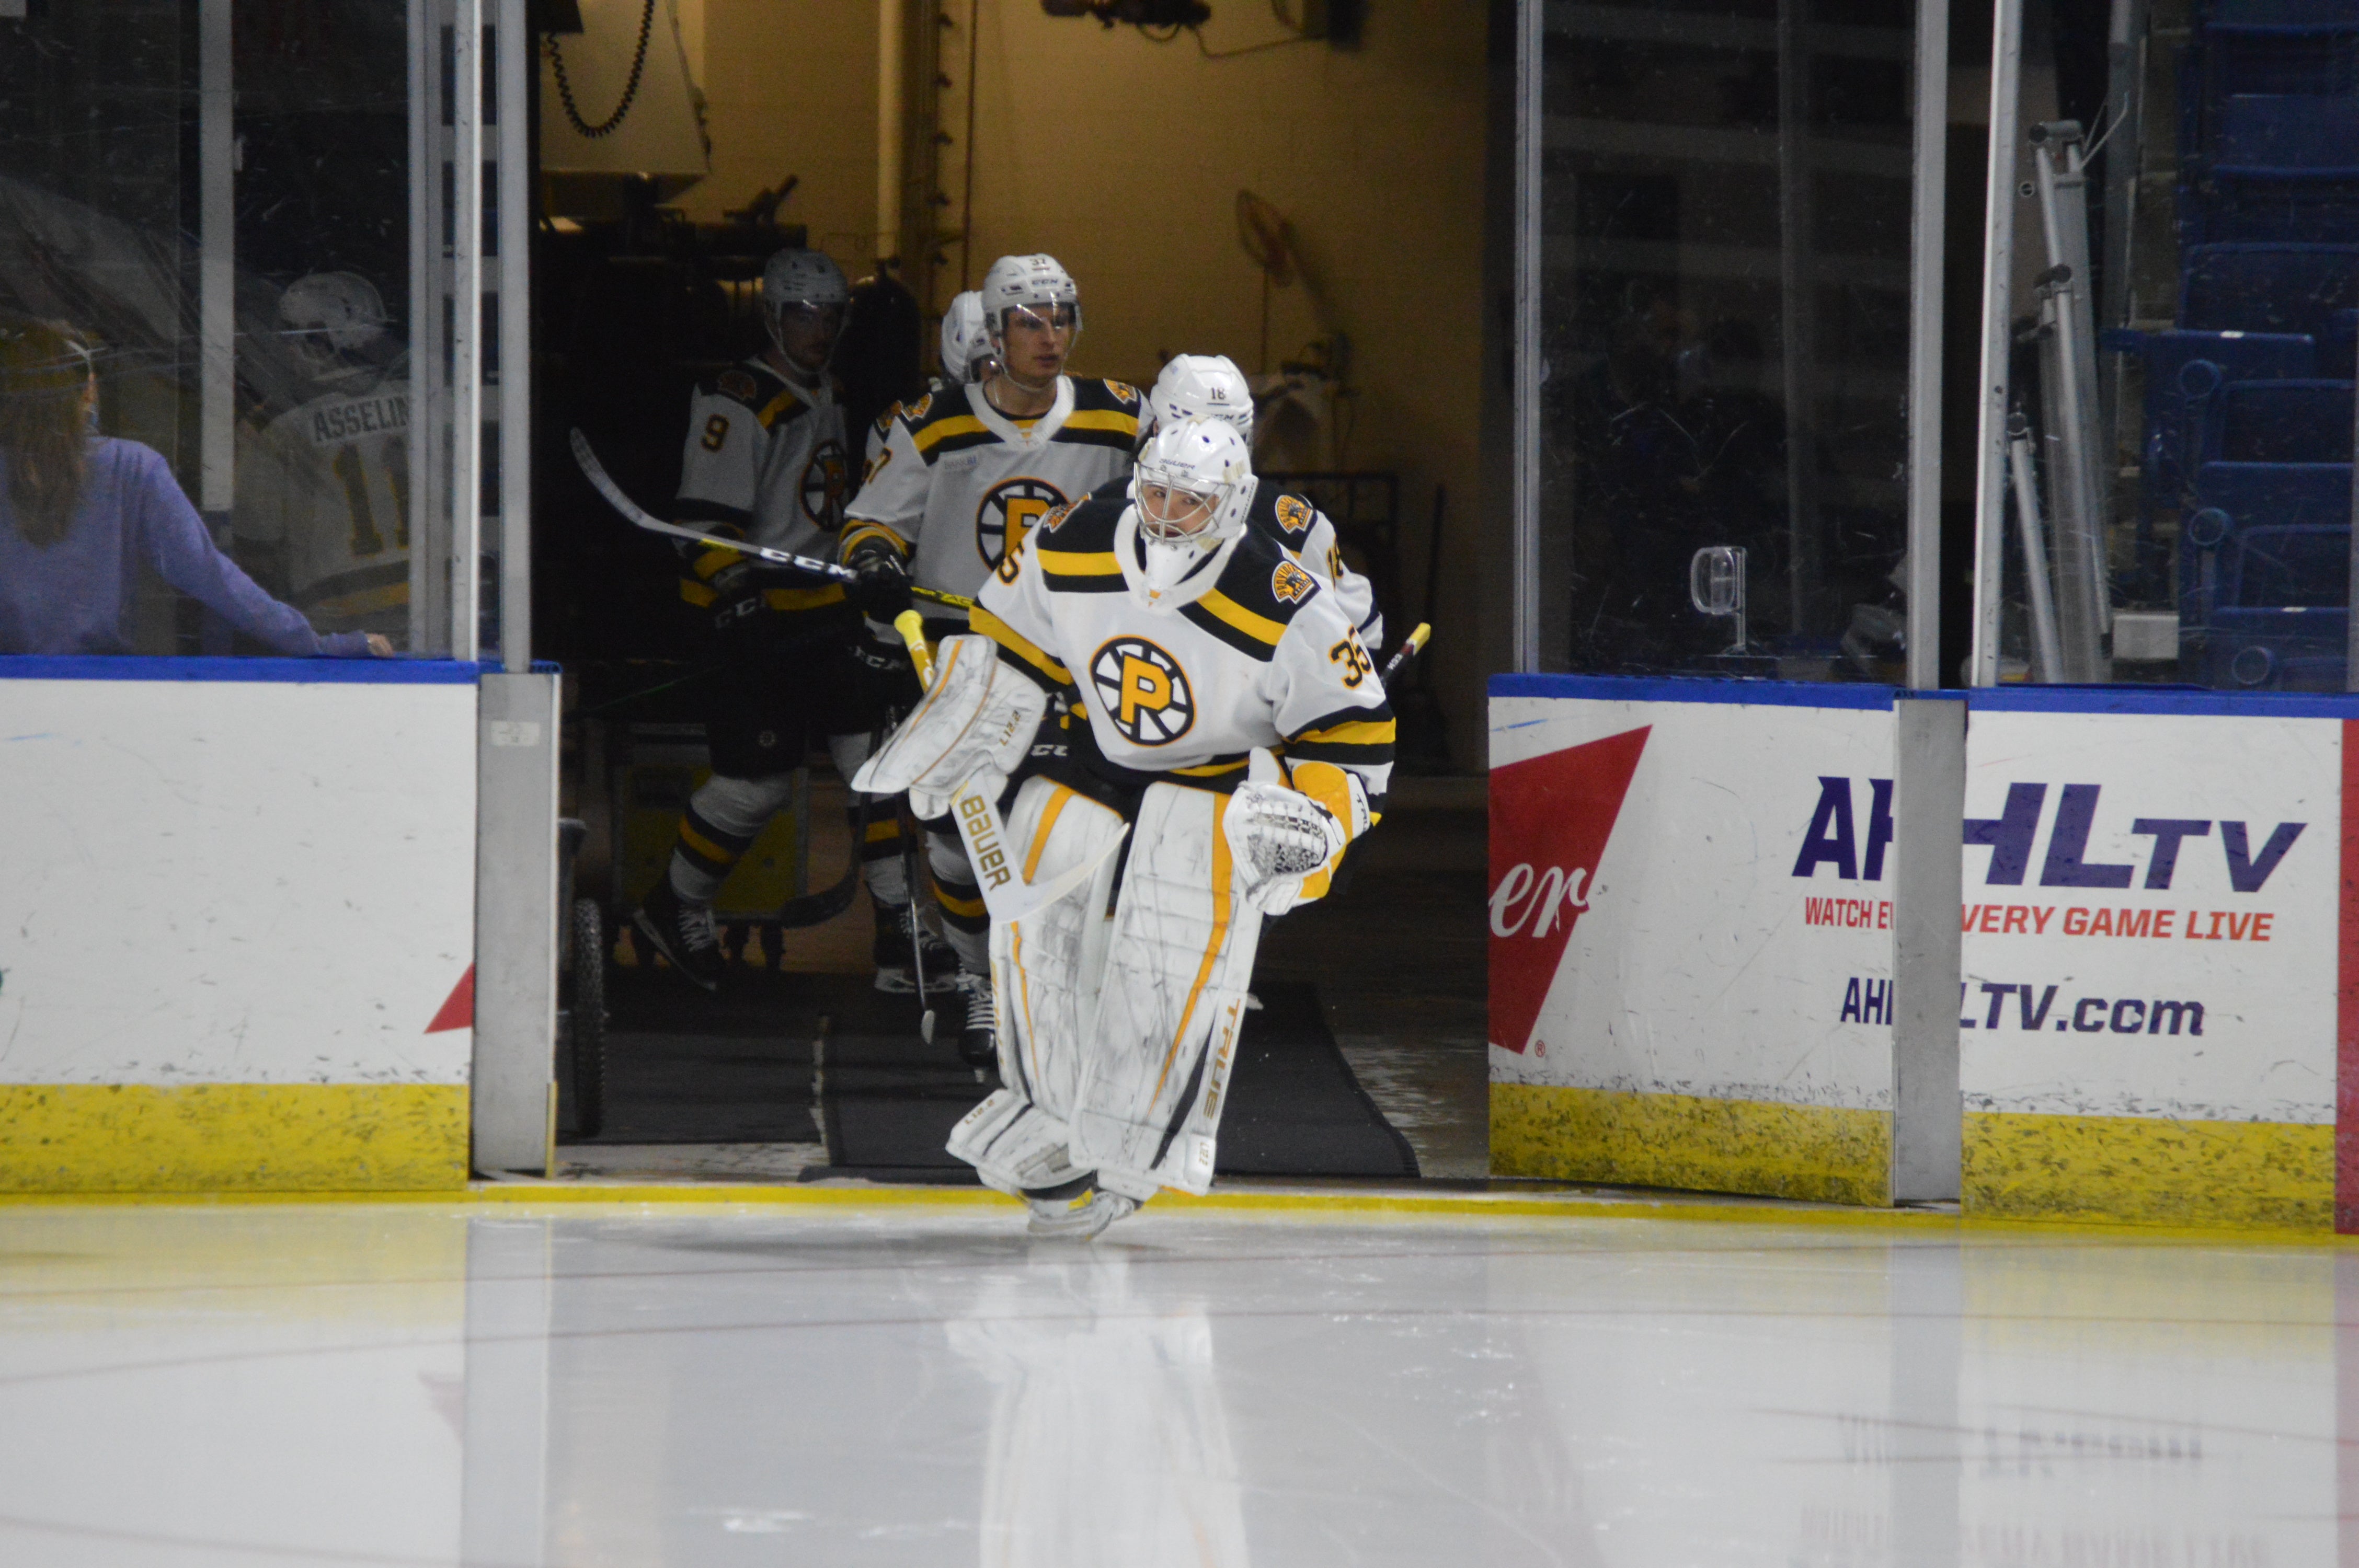 P-BRUINS TIE GAME LATE IN THIRD, FALL TO BRIDGEPORT SOUND TIGERS IN SHOOTOUT, 4-3